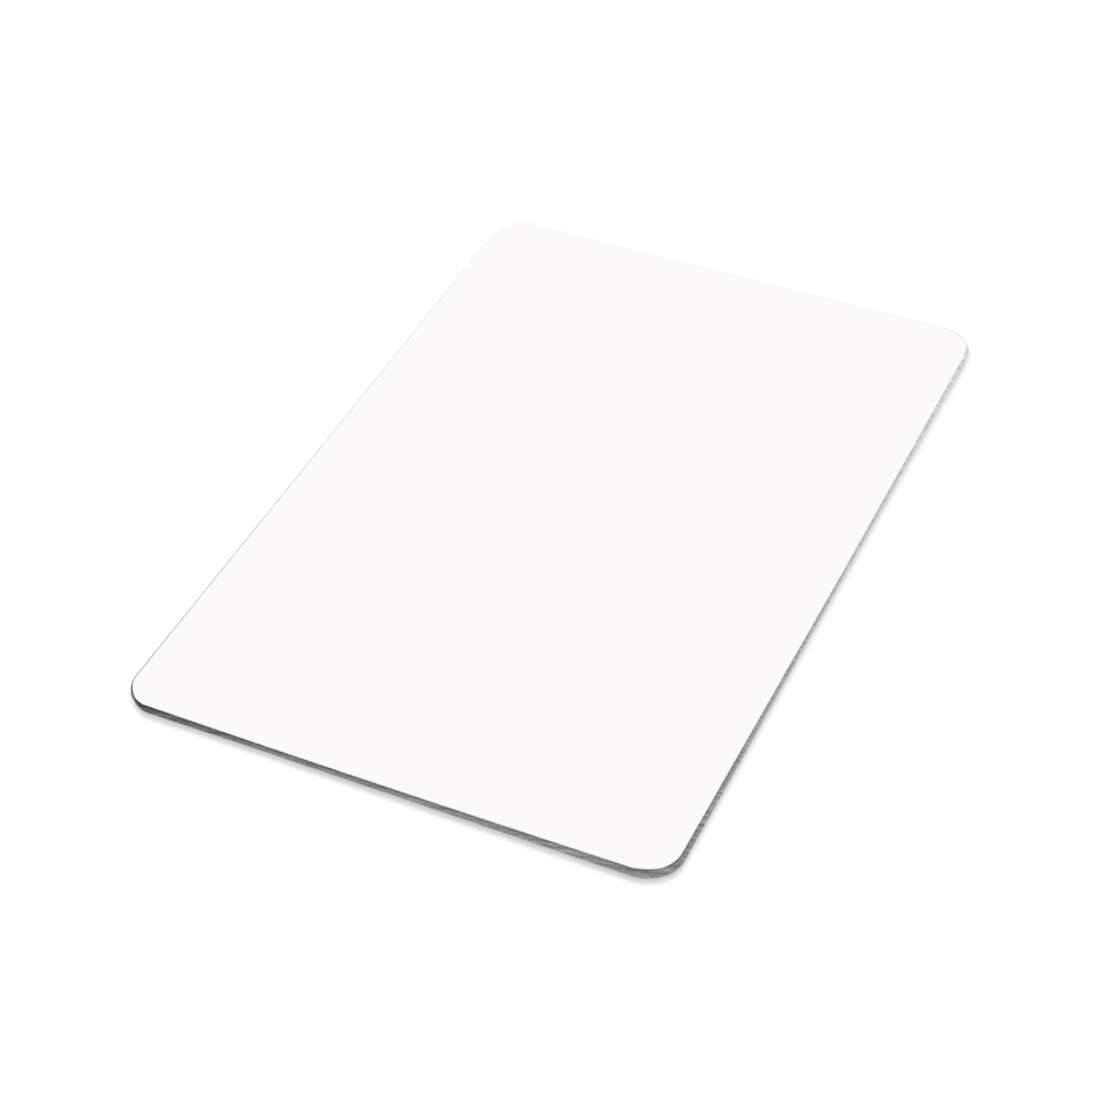 Aluminum Sublimation Magnet with Rounded Corners - 2